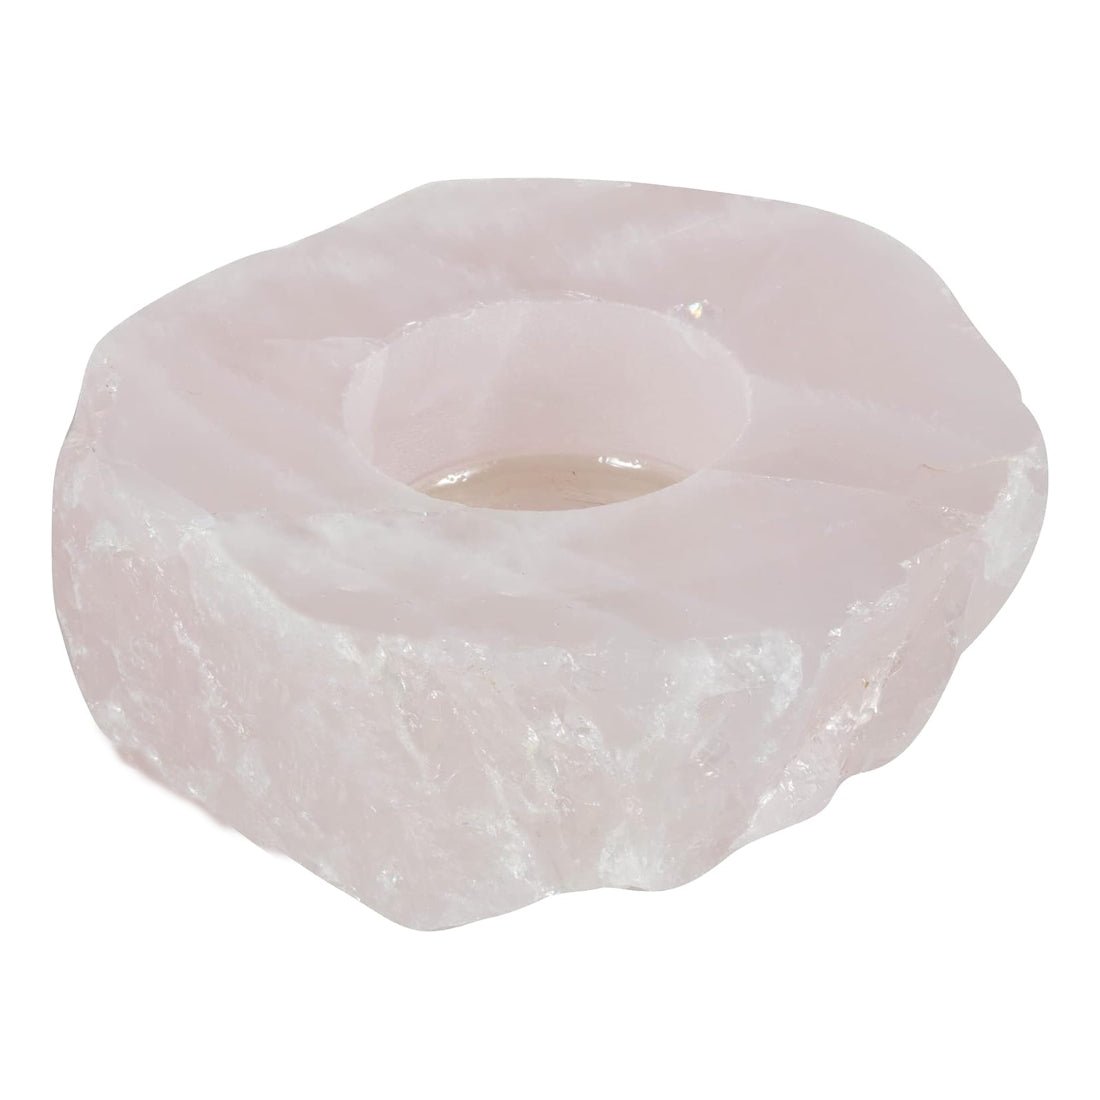 Rose Quartz Candle Holder with Polished Top - 13 Moons